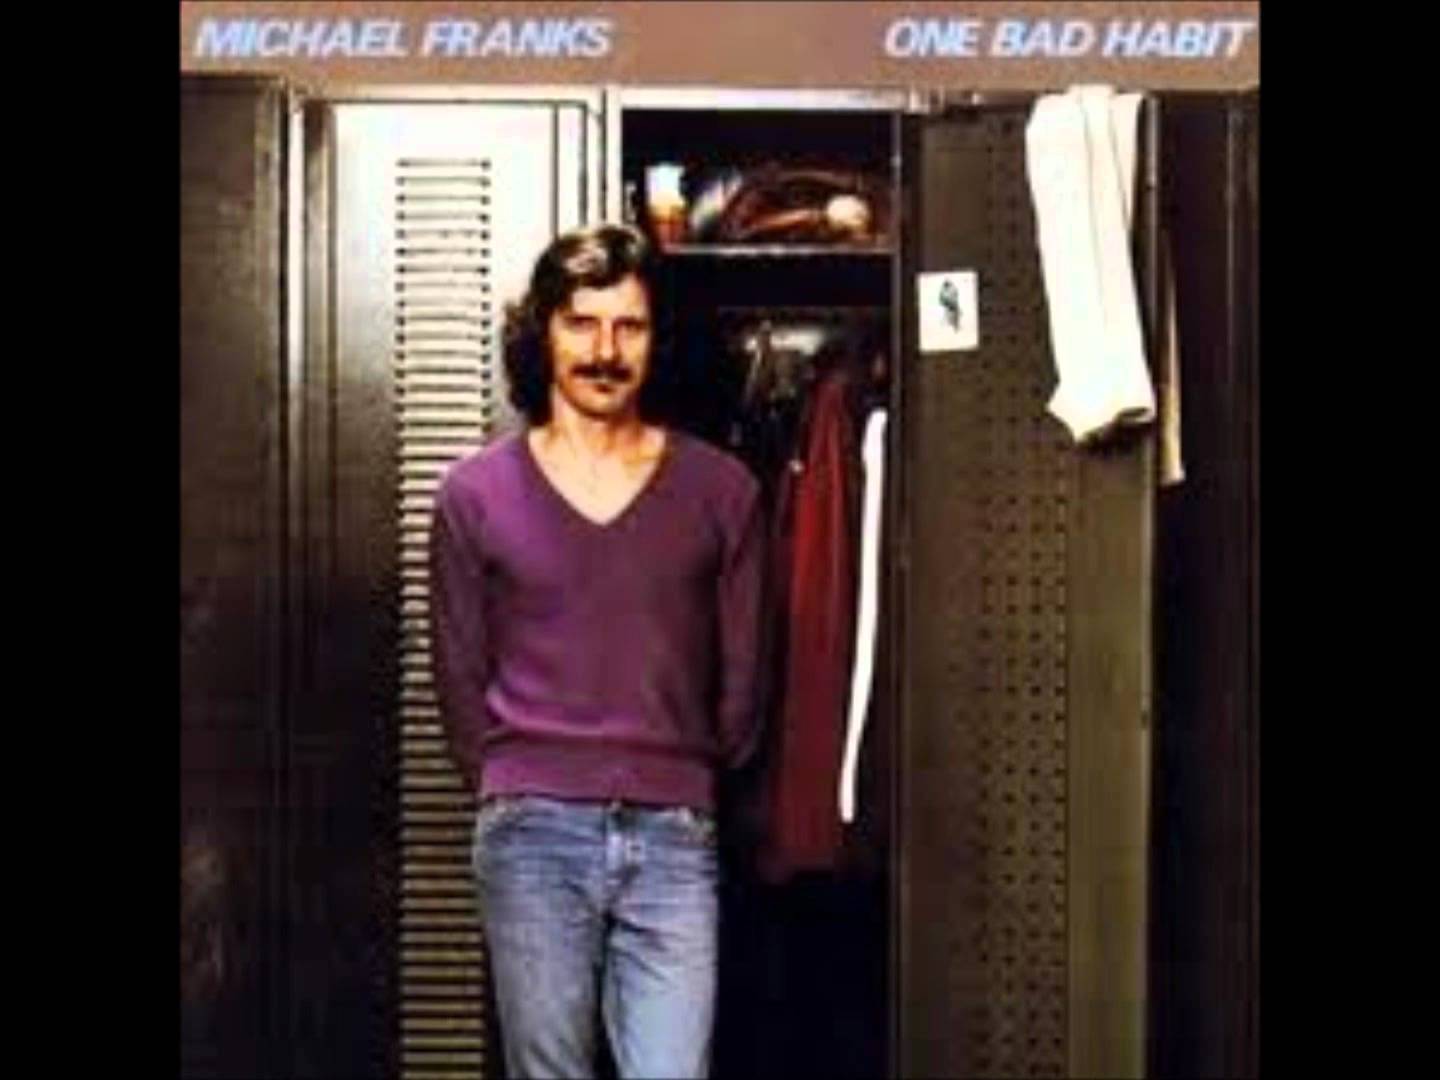 Michael Franks - Loving You More And More